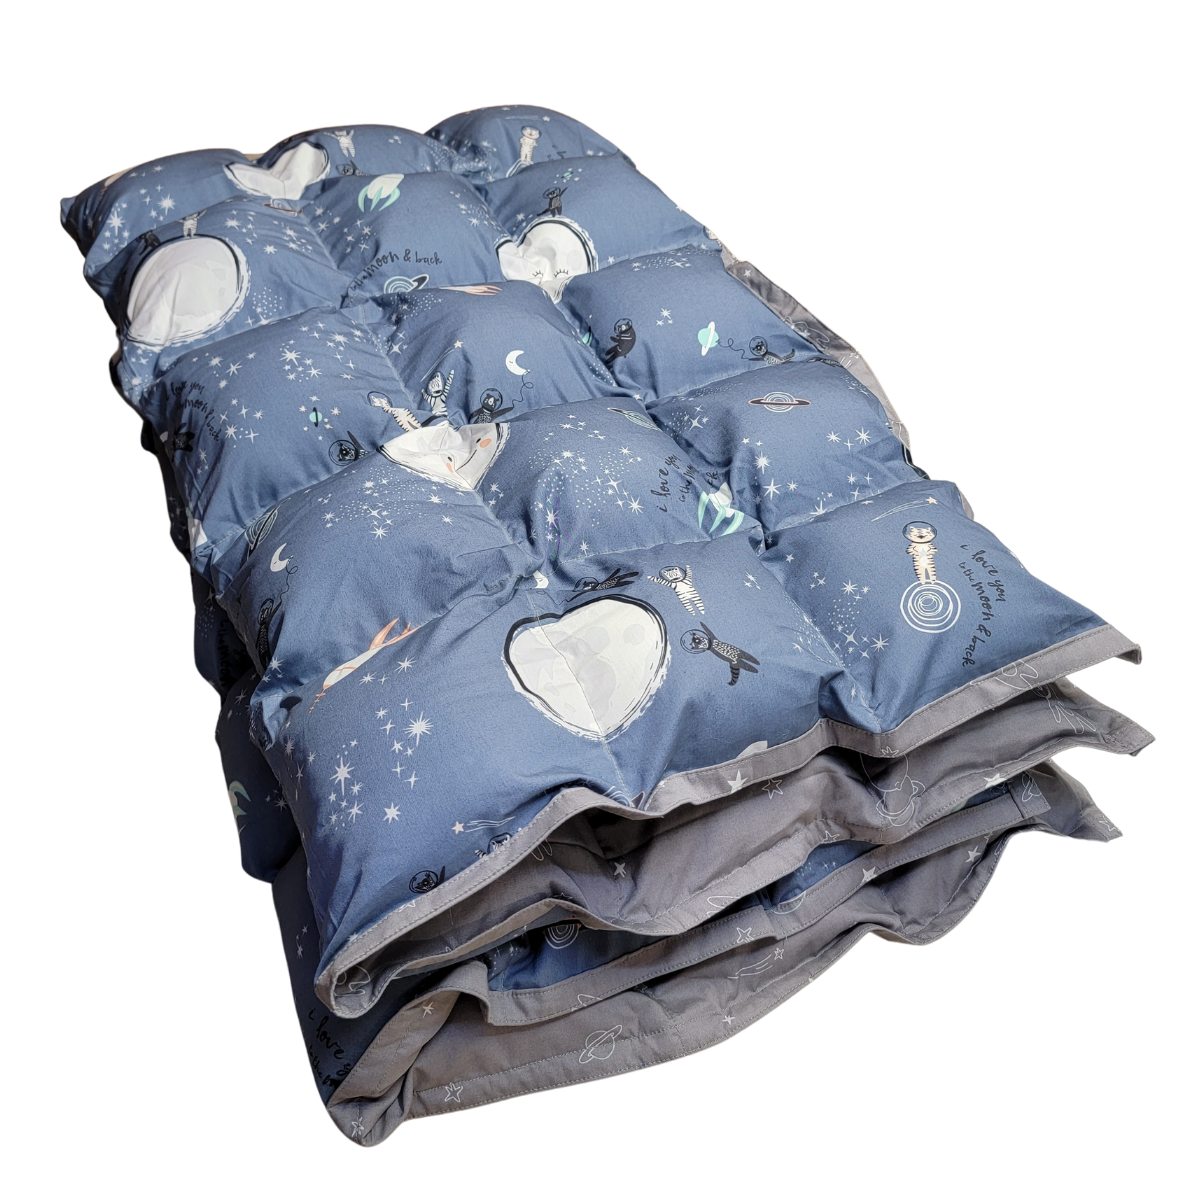 Custom Weighted Blanket - Space Animals